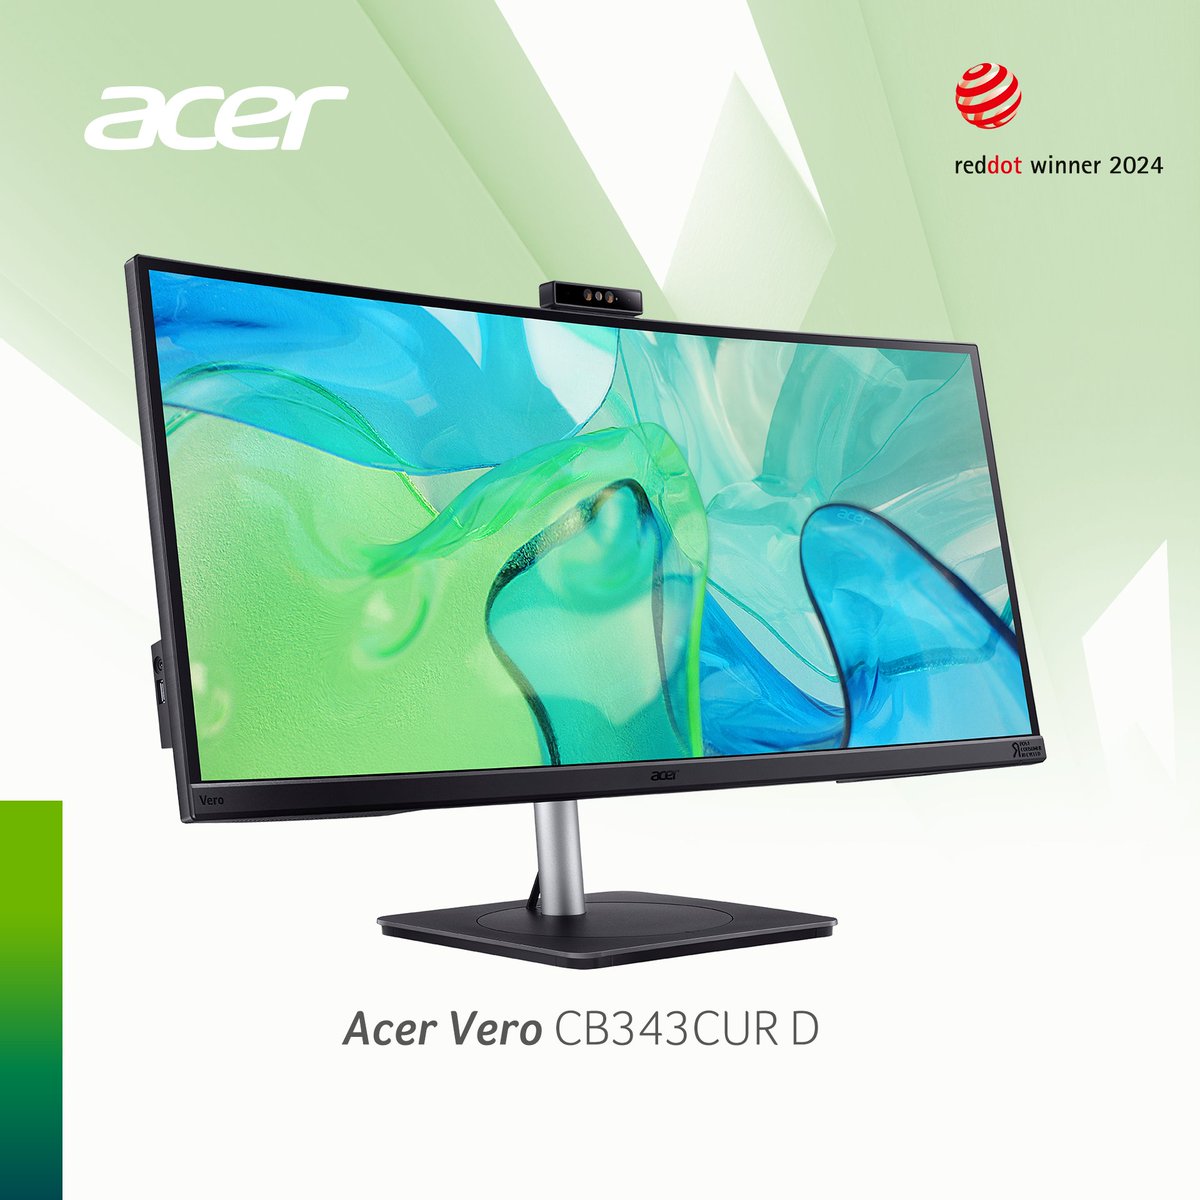 Acer stands triumphant 🏆, clinching multiple Red Dot 🔴 Design Awards for 2024! We’re beyond grateful for the recognition and support from our community. You inspire us to deepen our commitment to design excellence! Catch our award-winning lineup: acer.com/us-en/awards